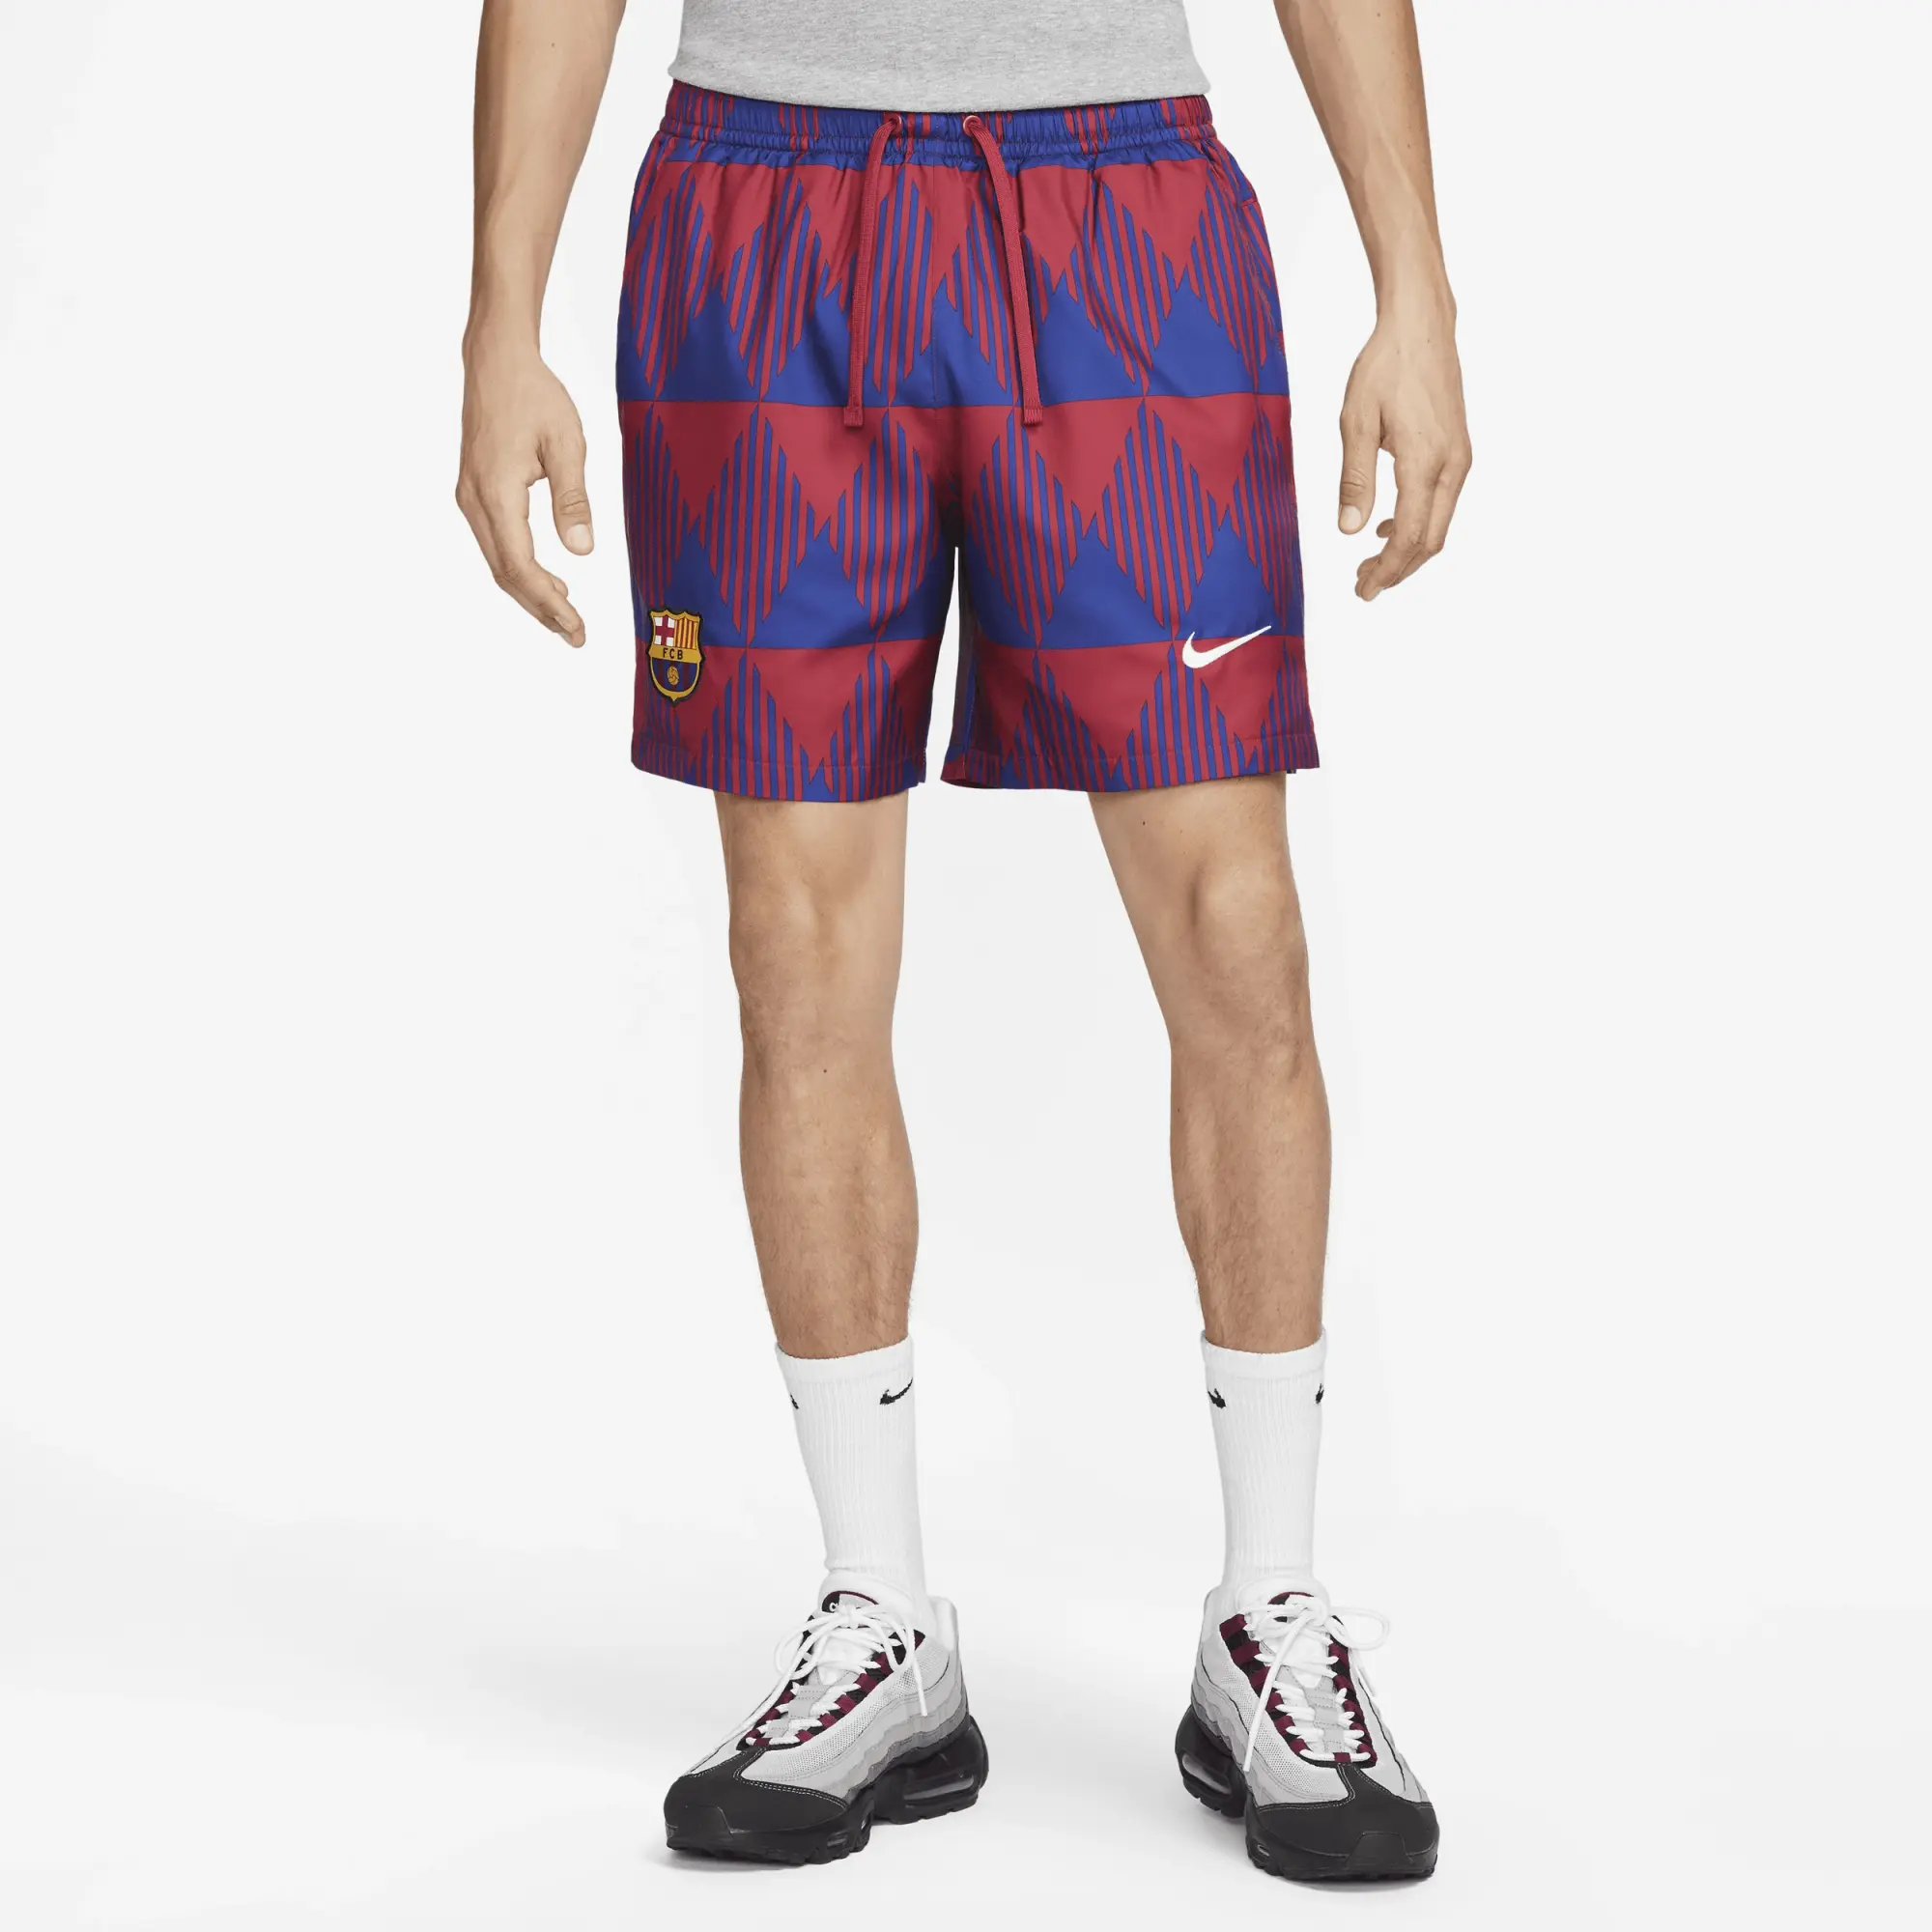 F.C. Barcelona Flow Men's Nike Graphic Football Shorts - Red